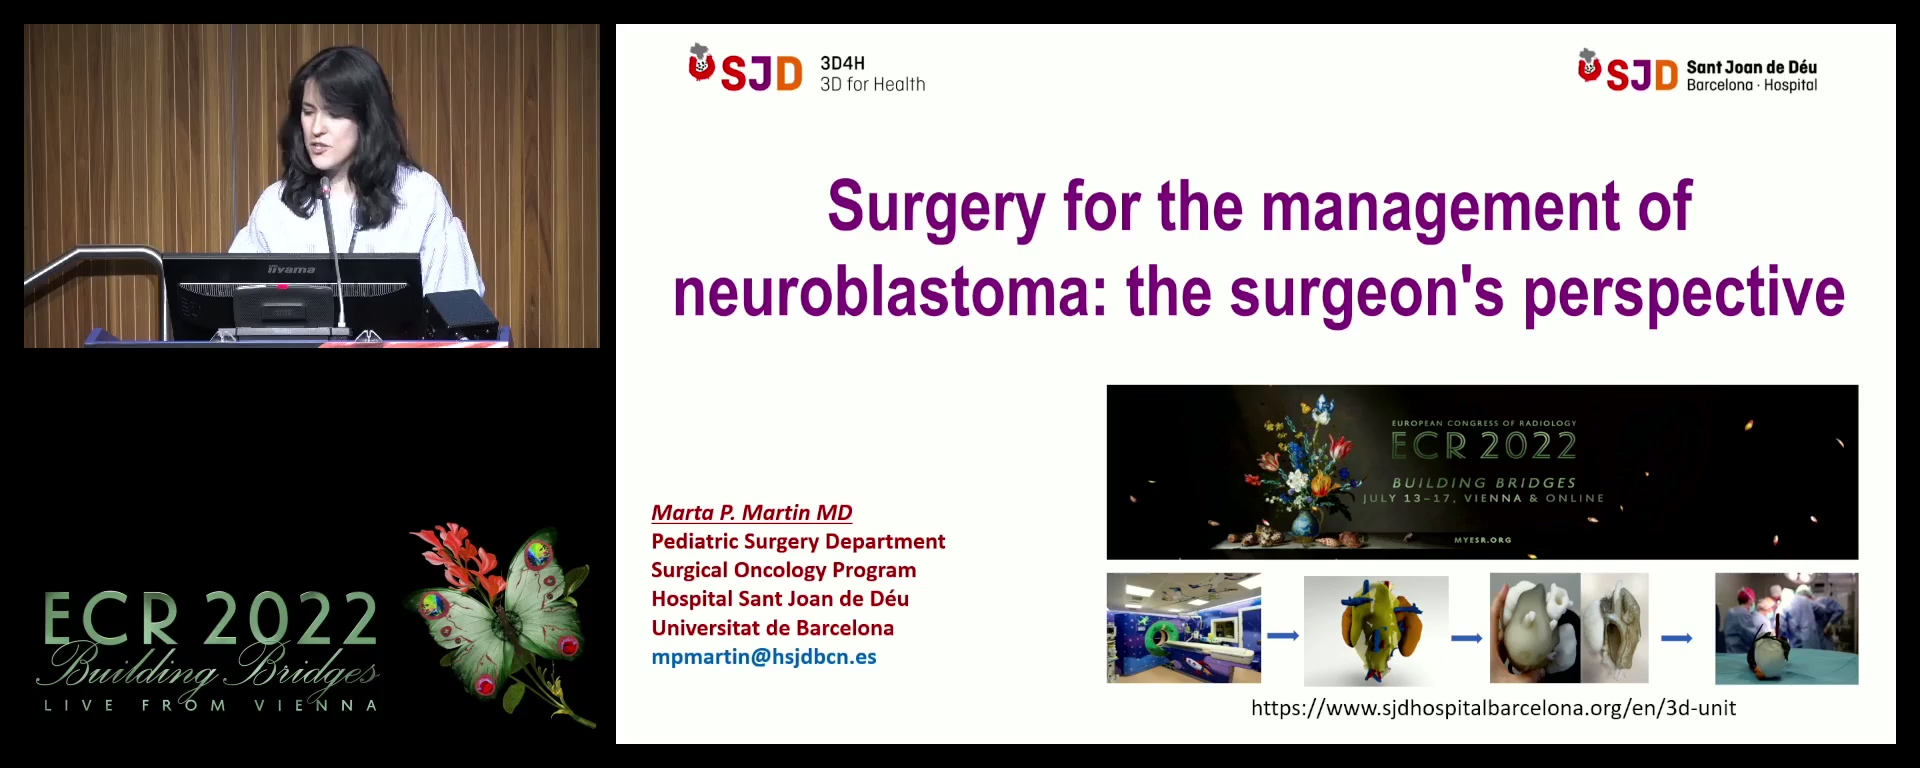 Surgery for the management of neuroblastoma: the surgeon's perspective